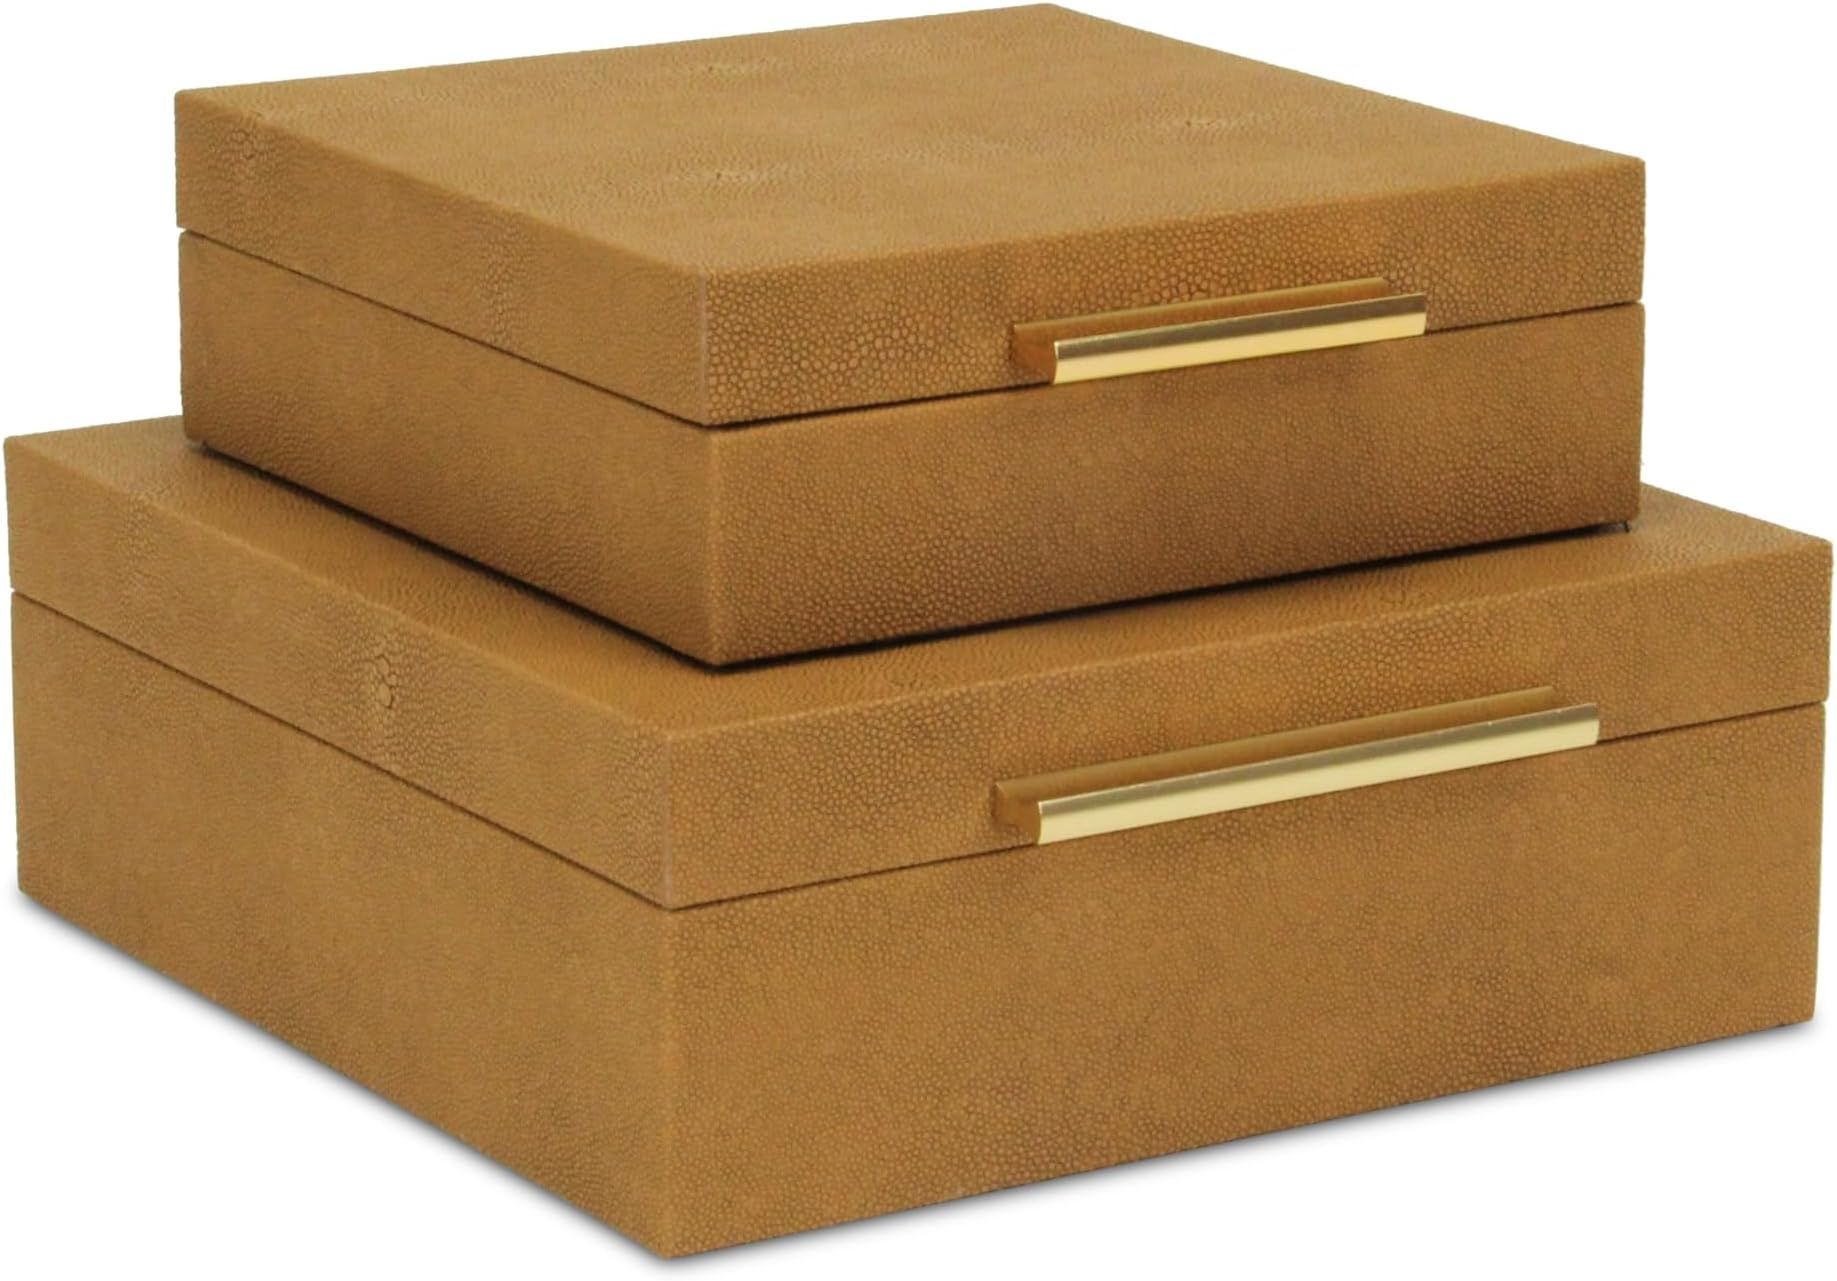 Cheungs Lusan Camel Brown Shagreen Boxes | Amazon (US)